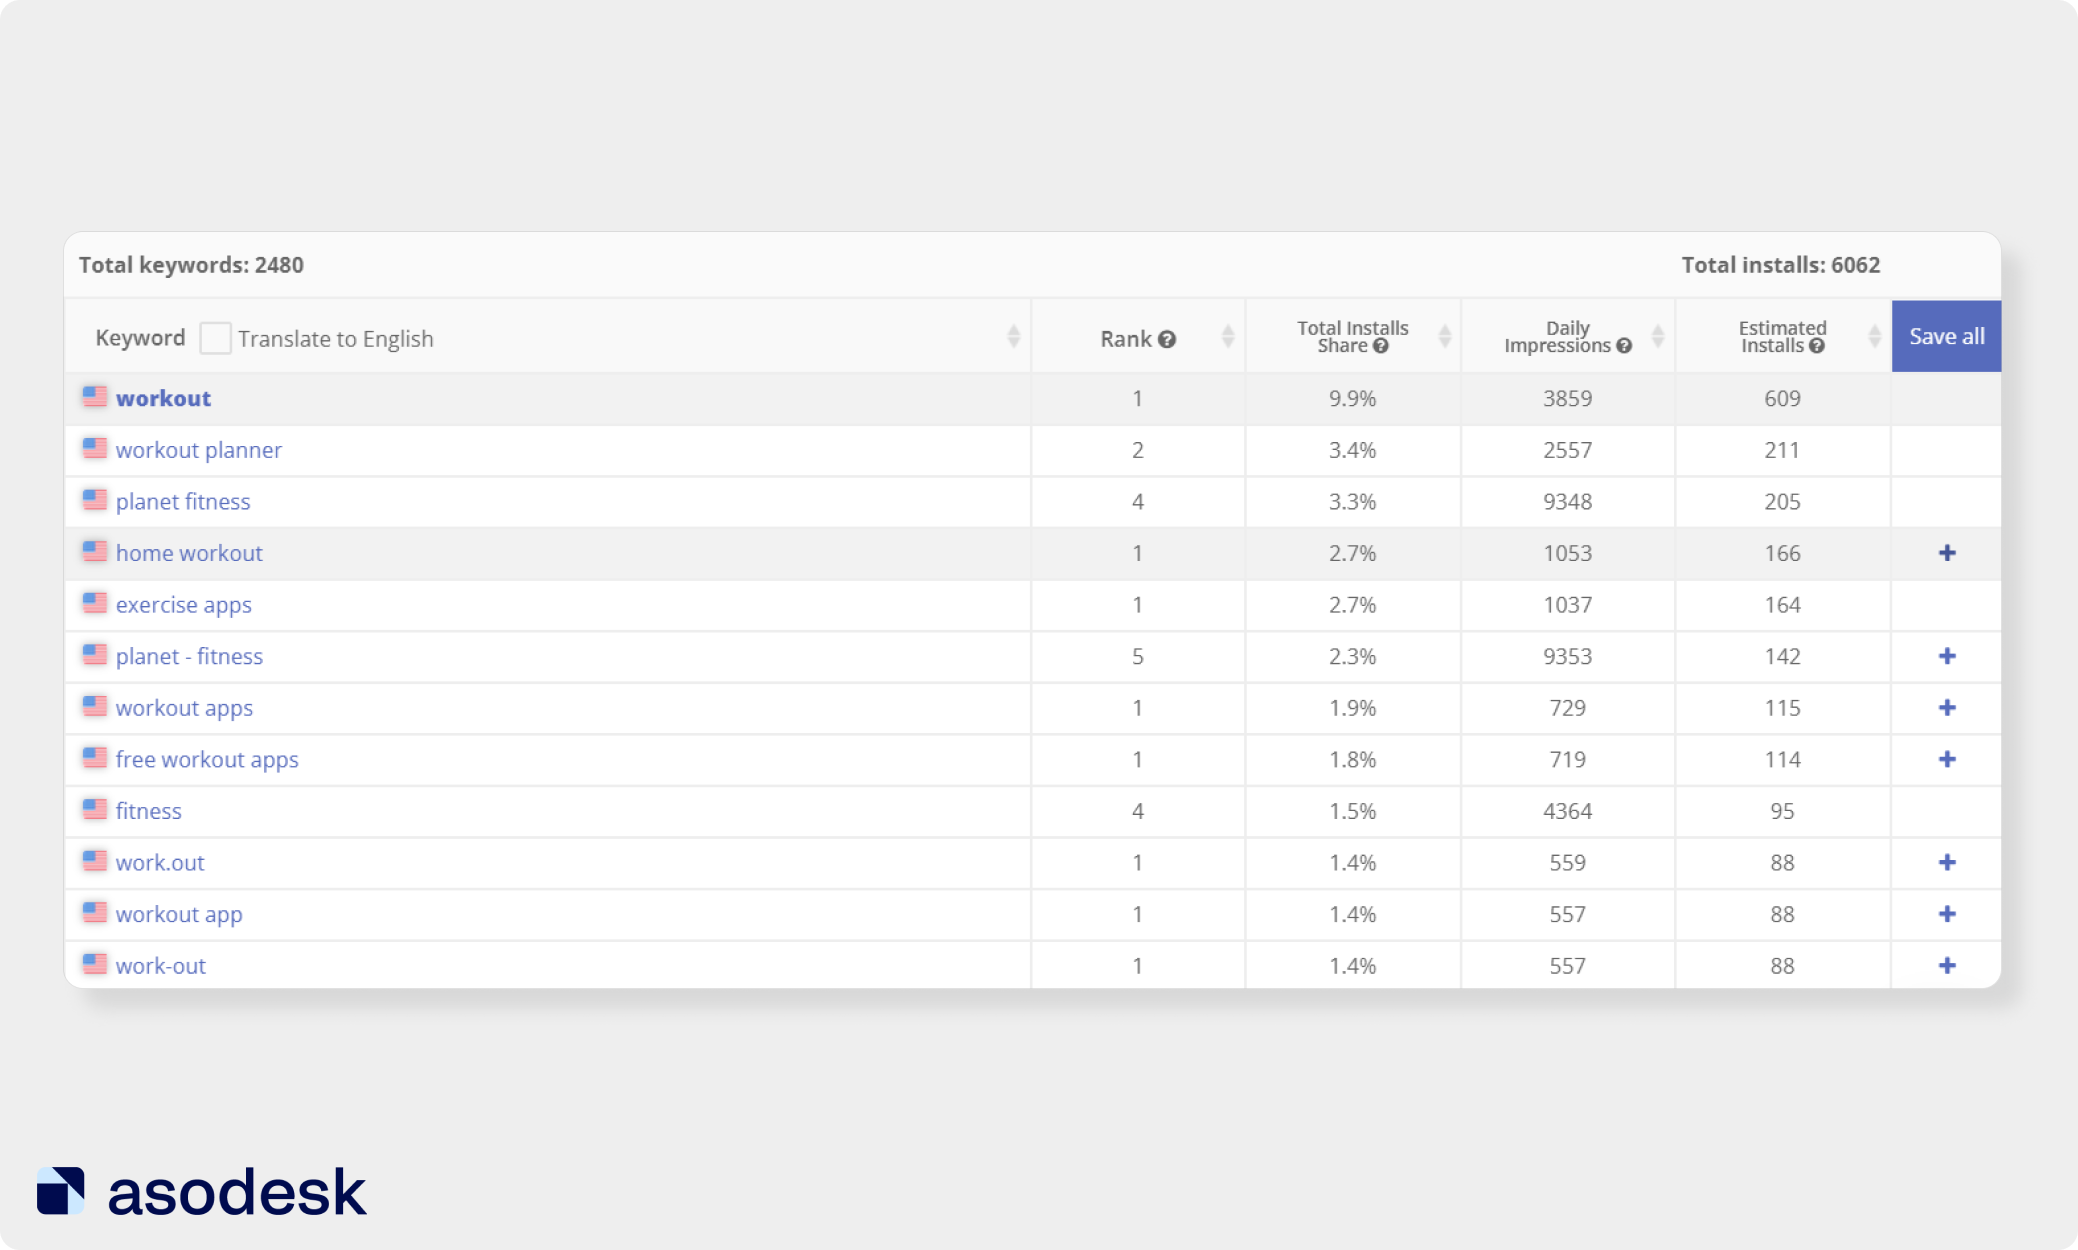 The Organic Report tool shows the approximate number of keyword installs